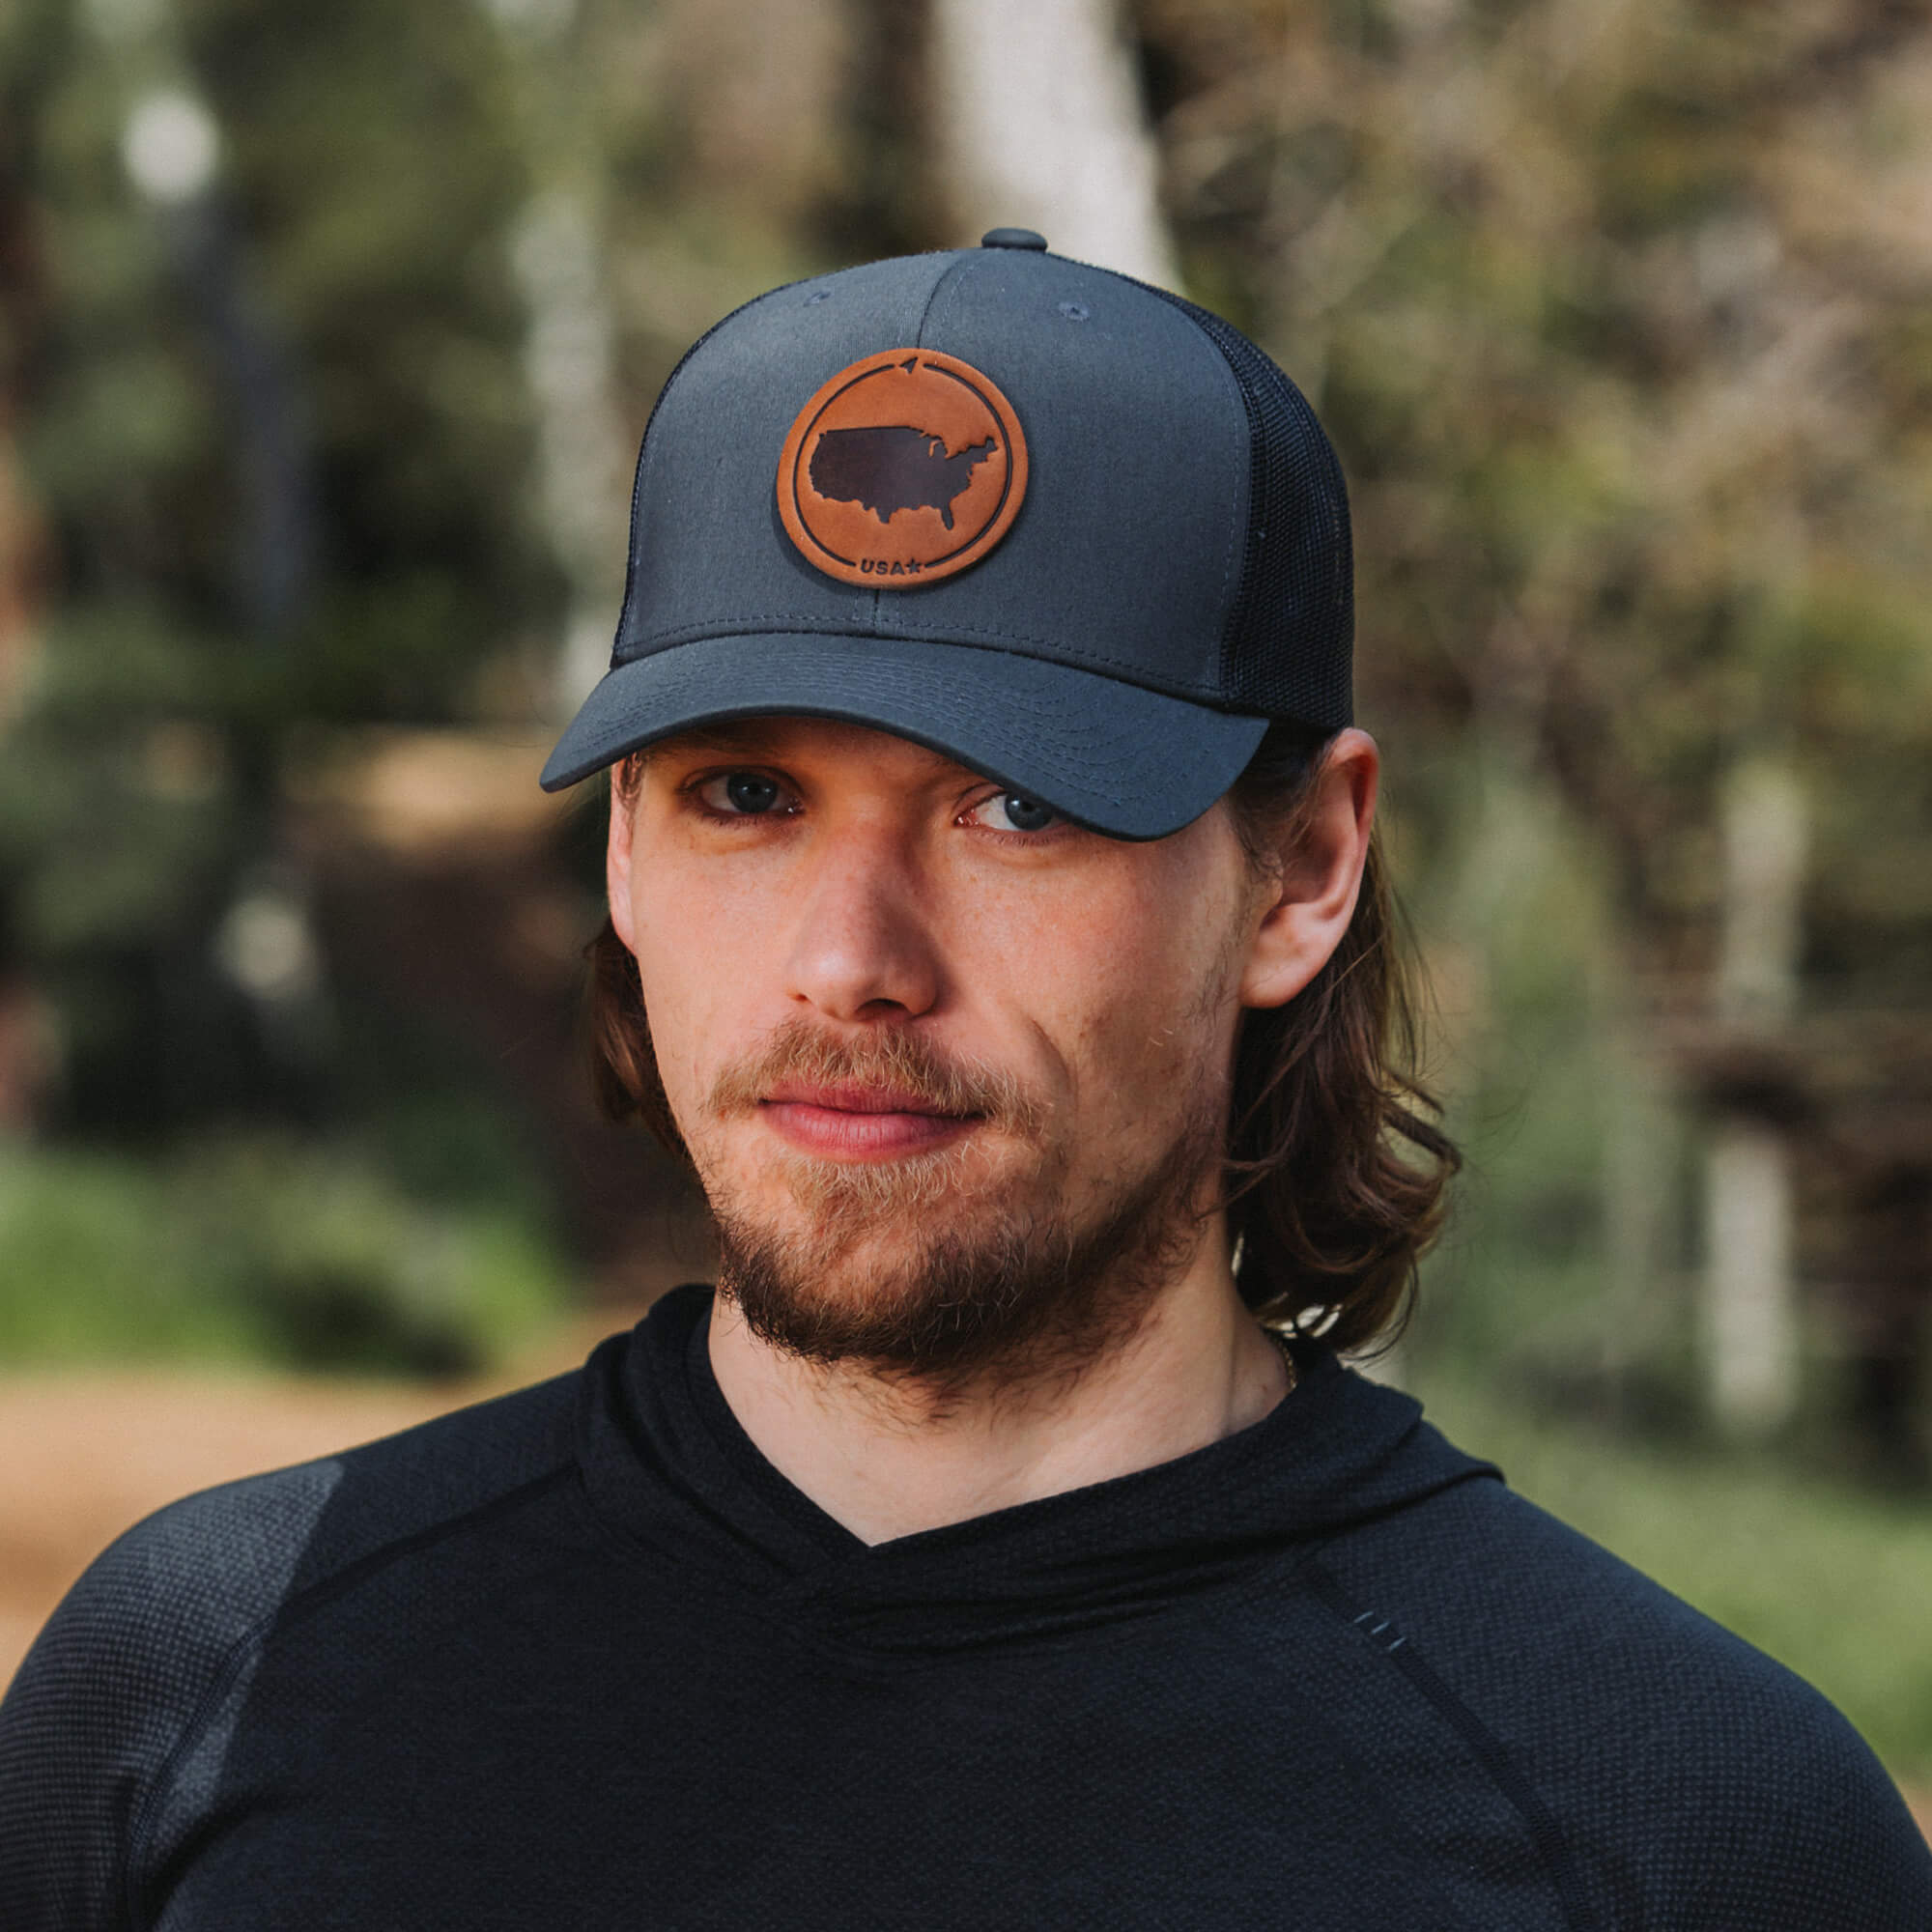 Charcoal trucker hat with full-grain leather patch of USA | BLACK-003-001, CHARC-003-001, NAVY-003-001, HGREY-003-001, MOSS-003-001, BROWN-003-001